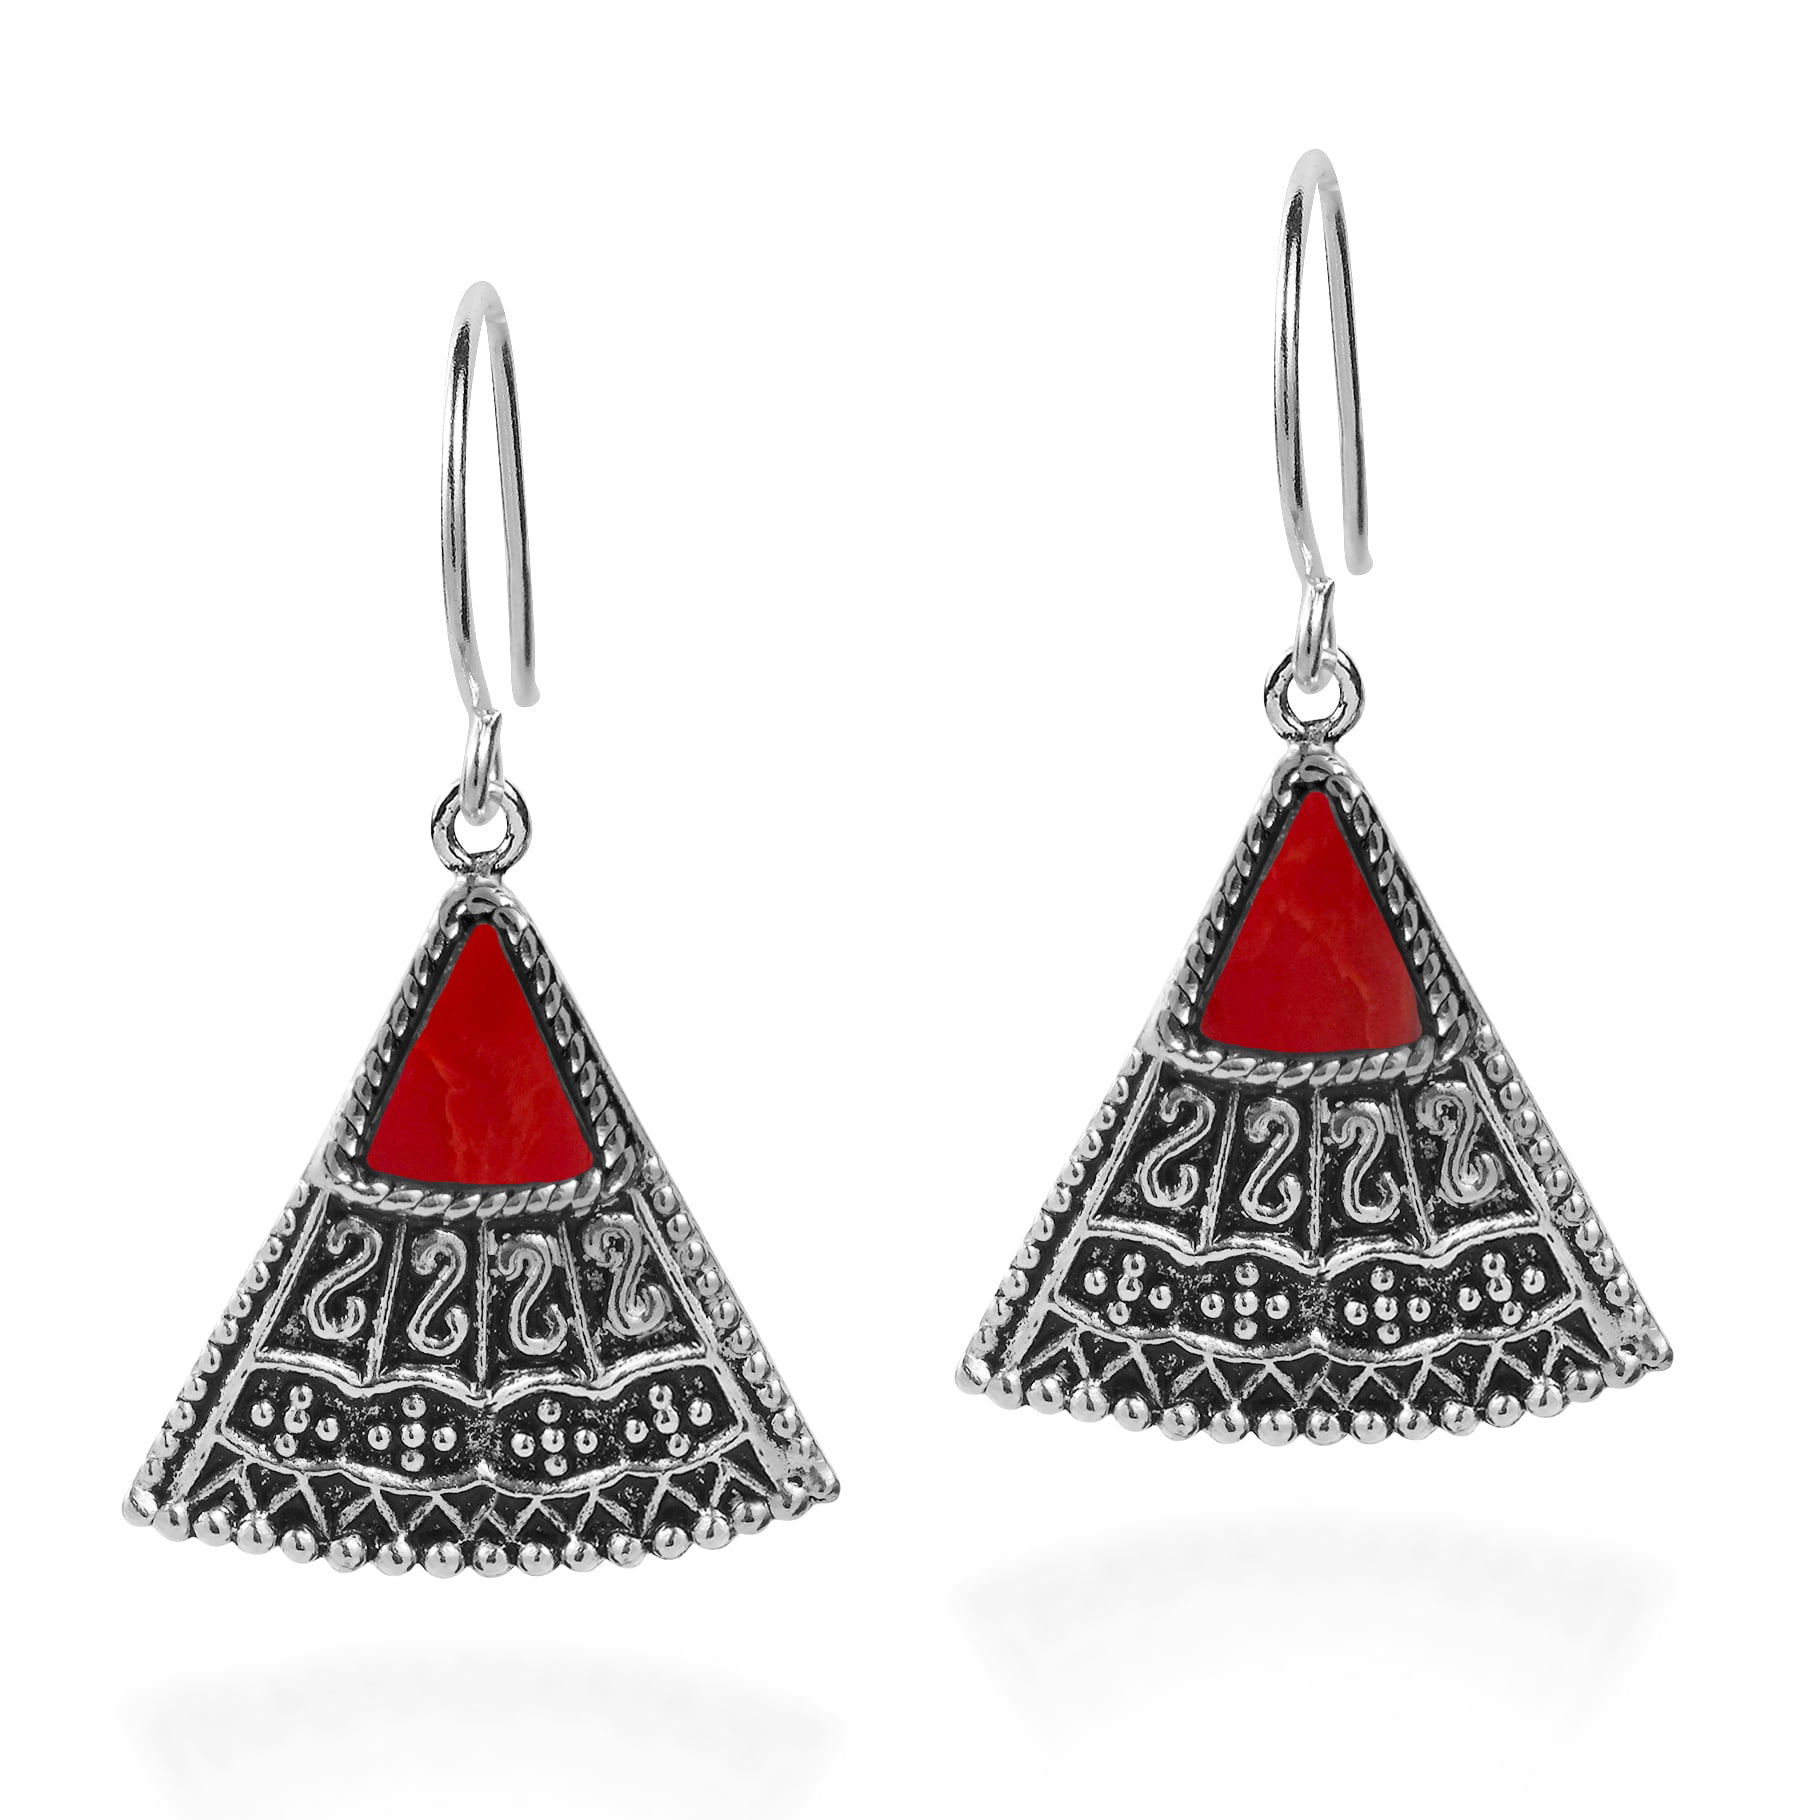 925 STERLING SILVER UNIQUE DESIGNER FILIGREE FASHION DROP DANGLE BALINESE EARRING FOR WOMEN & GIRLS RED CORAL GEMSTONE HANDMADE EARRING JEWELRY BY ARTISANS